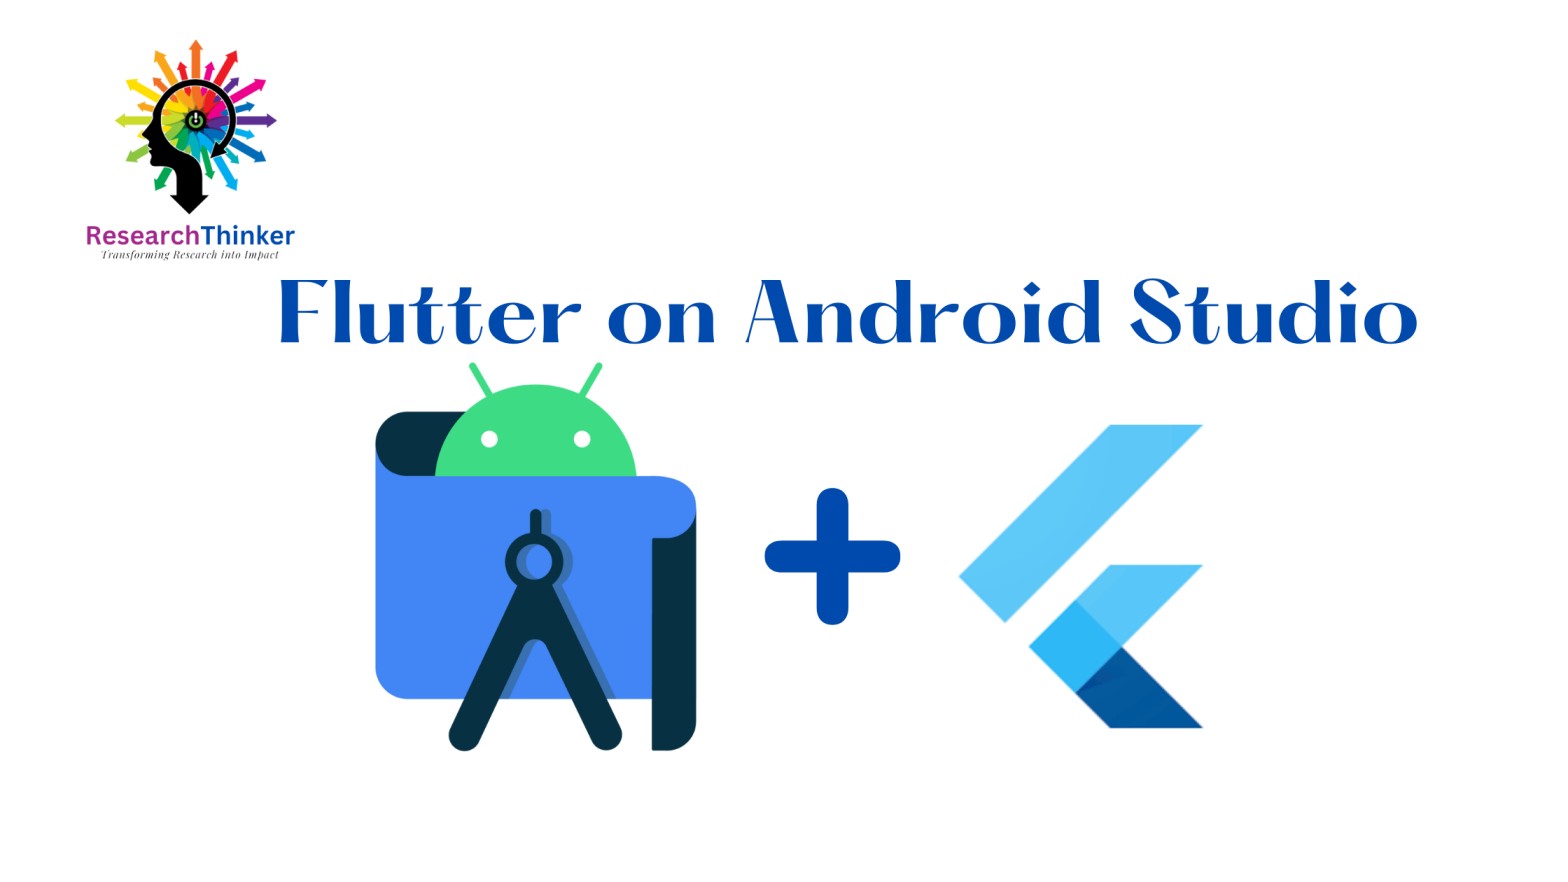 20 best plugins in android studio for flutter code - ResearchThinker